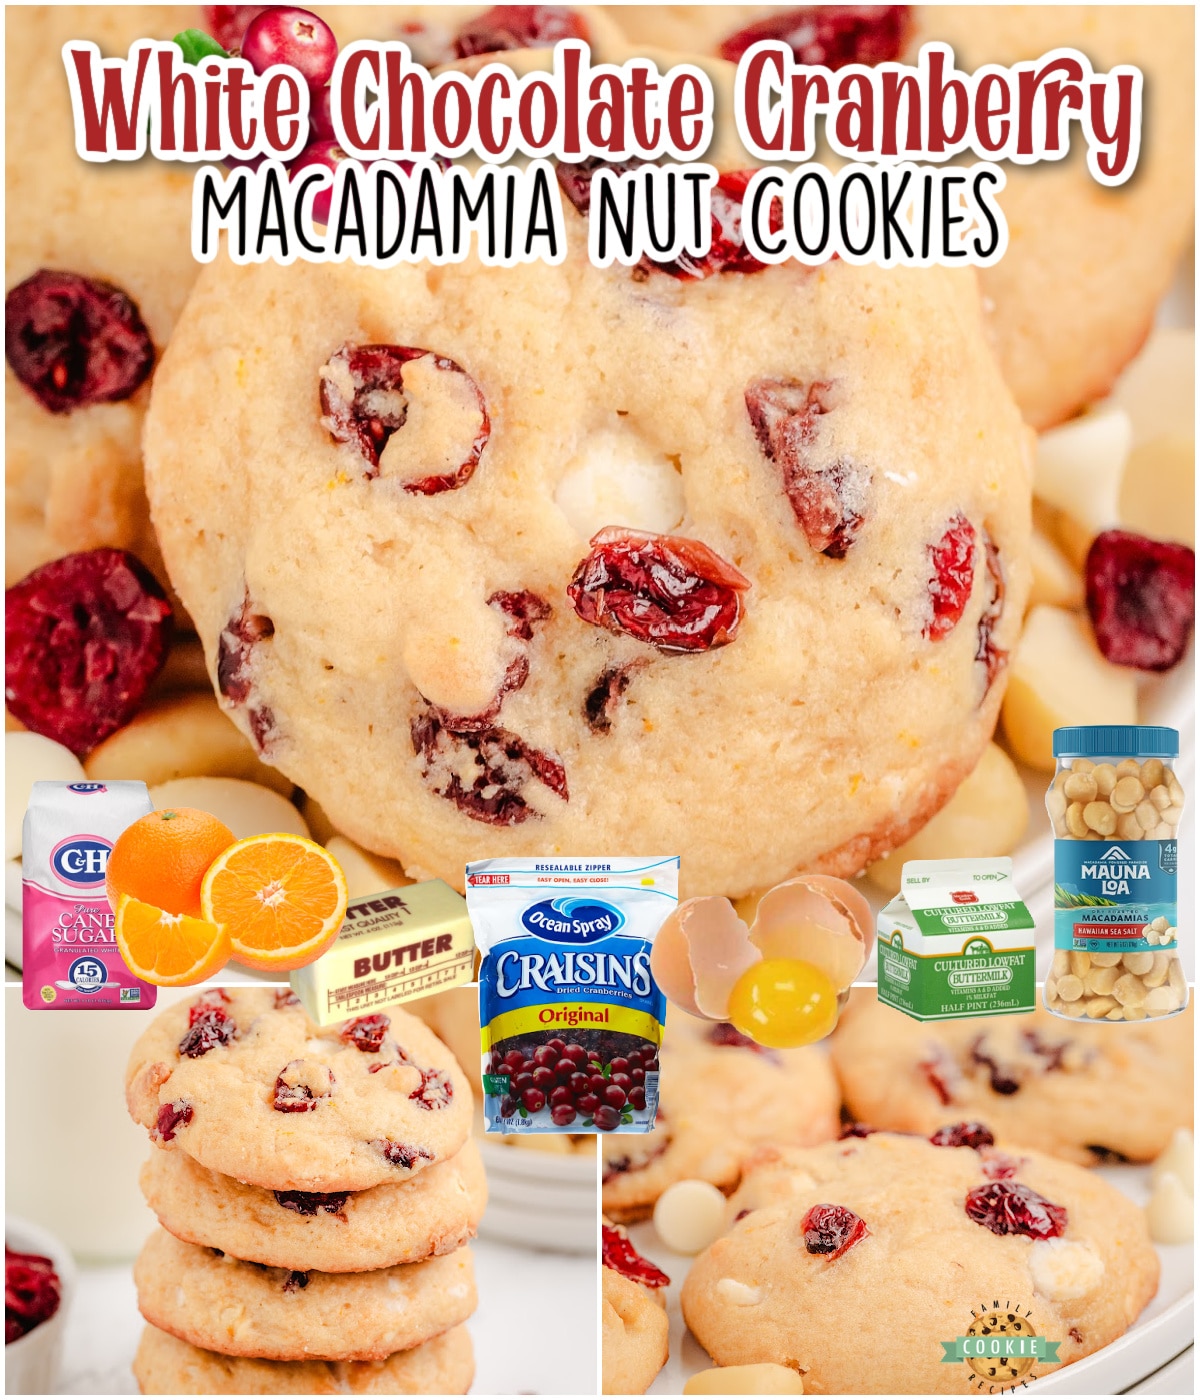 Cranberry Macadamia Nut Cookies is a delightful, festive cookie that combines tart cranberries, sweet white chocolate & crunchy macadamia nuts!